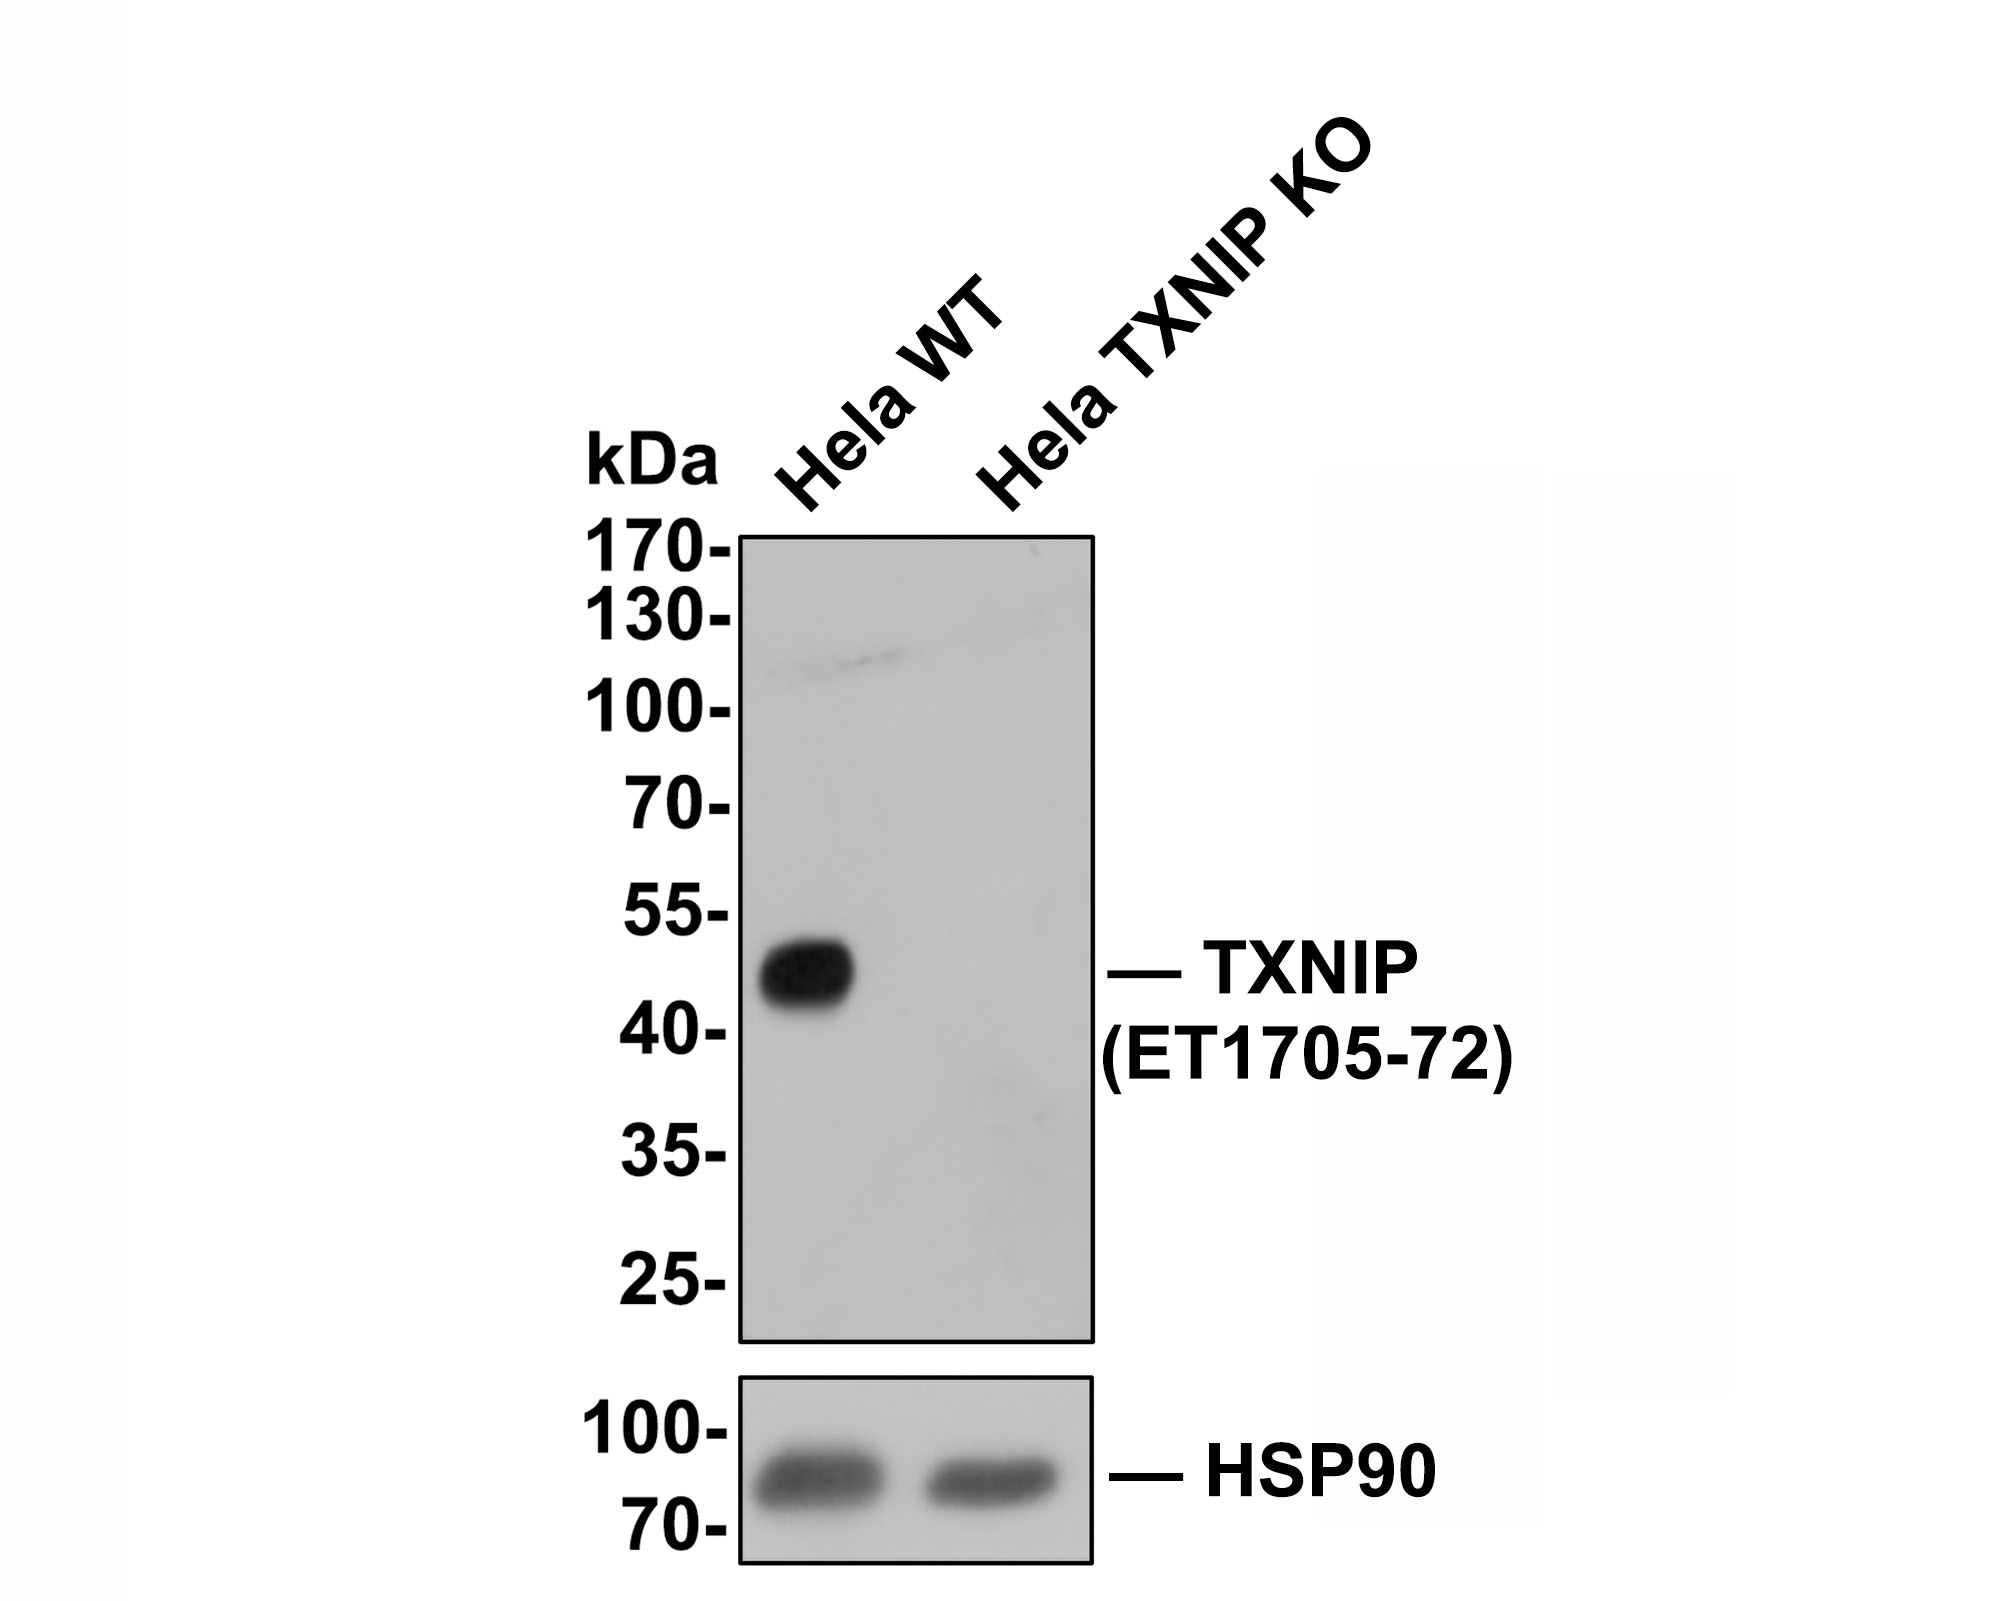 All lanes: Western blot analysis of TXNIP with anti-TXNIP antibody (ET1705-72) at 1/500 dilution.<br />
Lane 1: Wild-type Hela whole cell lysate (10 µg).<br />
Lane 2: TXNIP knockout Hela whole cell lysate (10 µg).<br />
<br />
ET1705-72 was shown to specifically react with TXNIP in wild-type Hela cells. No band was observed when TXNIP knockout sample was tested. Wild-type and TXNIP knockout samples were subjected to SDS-PAGE. Proteins were transferred to a PVDF membrane and blocked with 5% NFDM in TBST for 1 hour at room temperature. The primary antibody (ET1705-72, 1/500) was used in 5% BSA at room temperature for 2 hours. Goat Anti-Rabbit IgG-HRP Secondary Antibody (HA1001) at 1:300,000 dilution was used for 1 hour at room temperature.